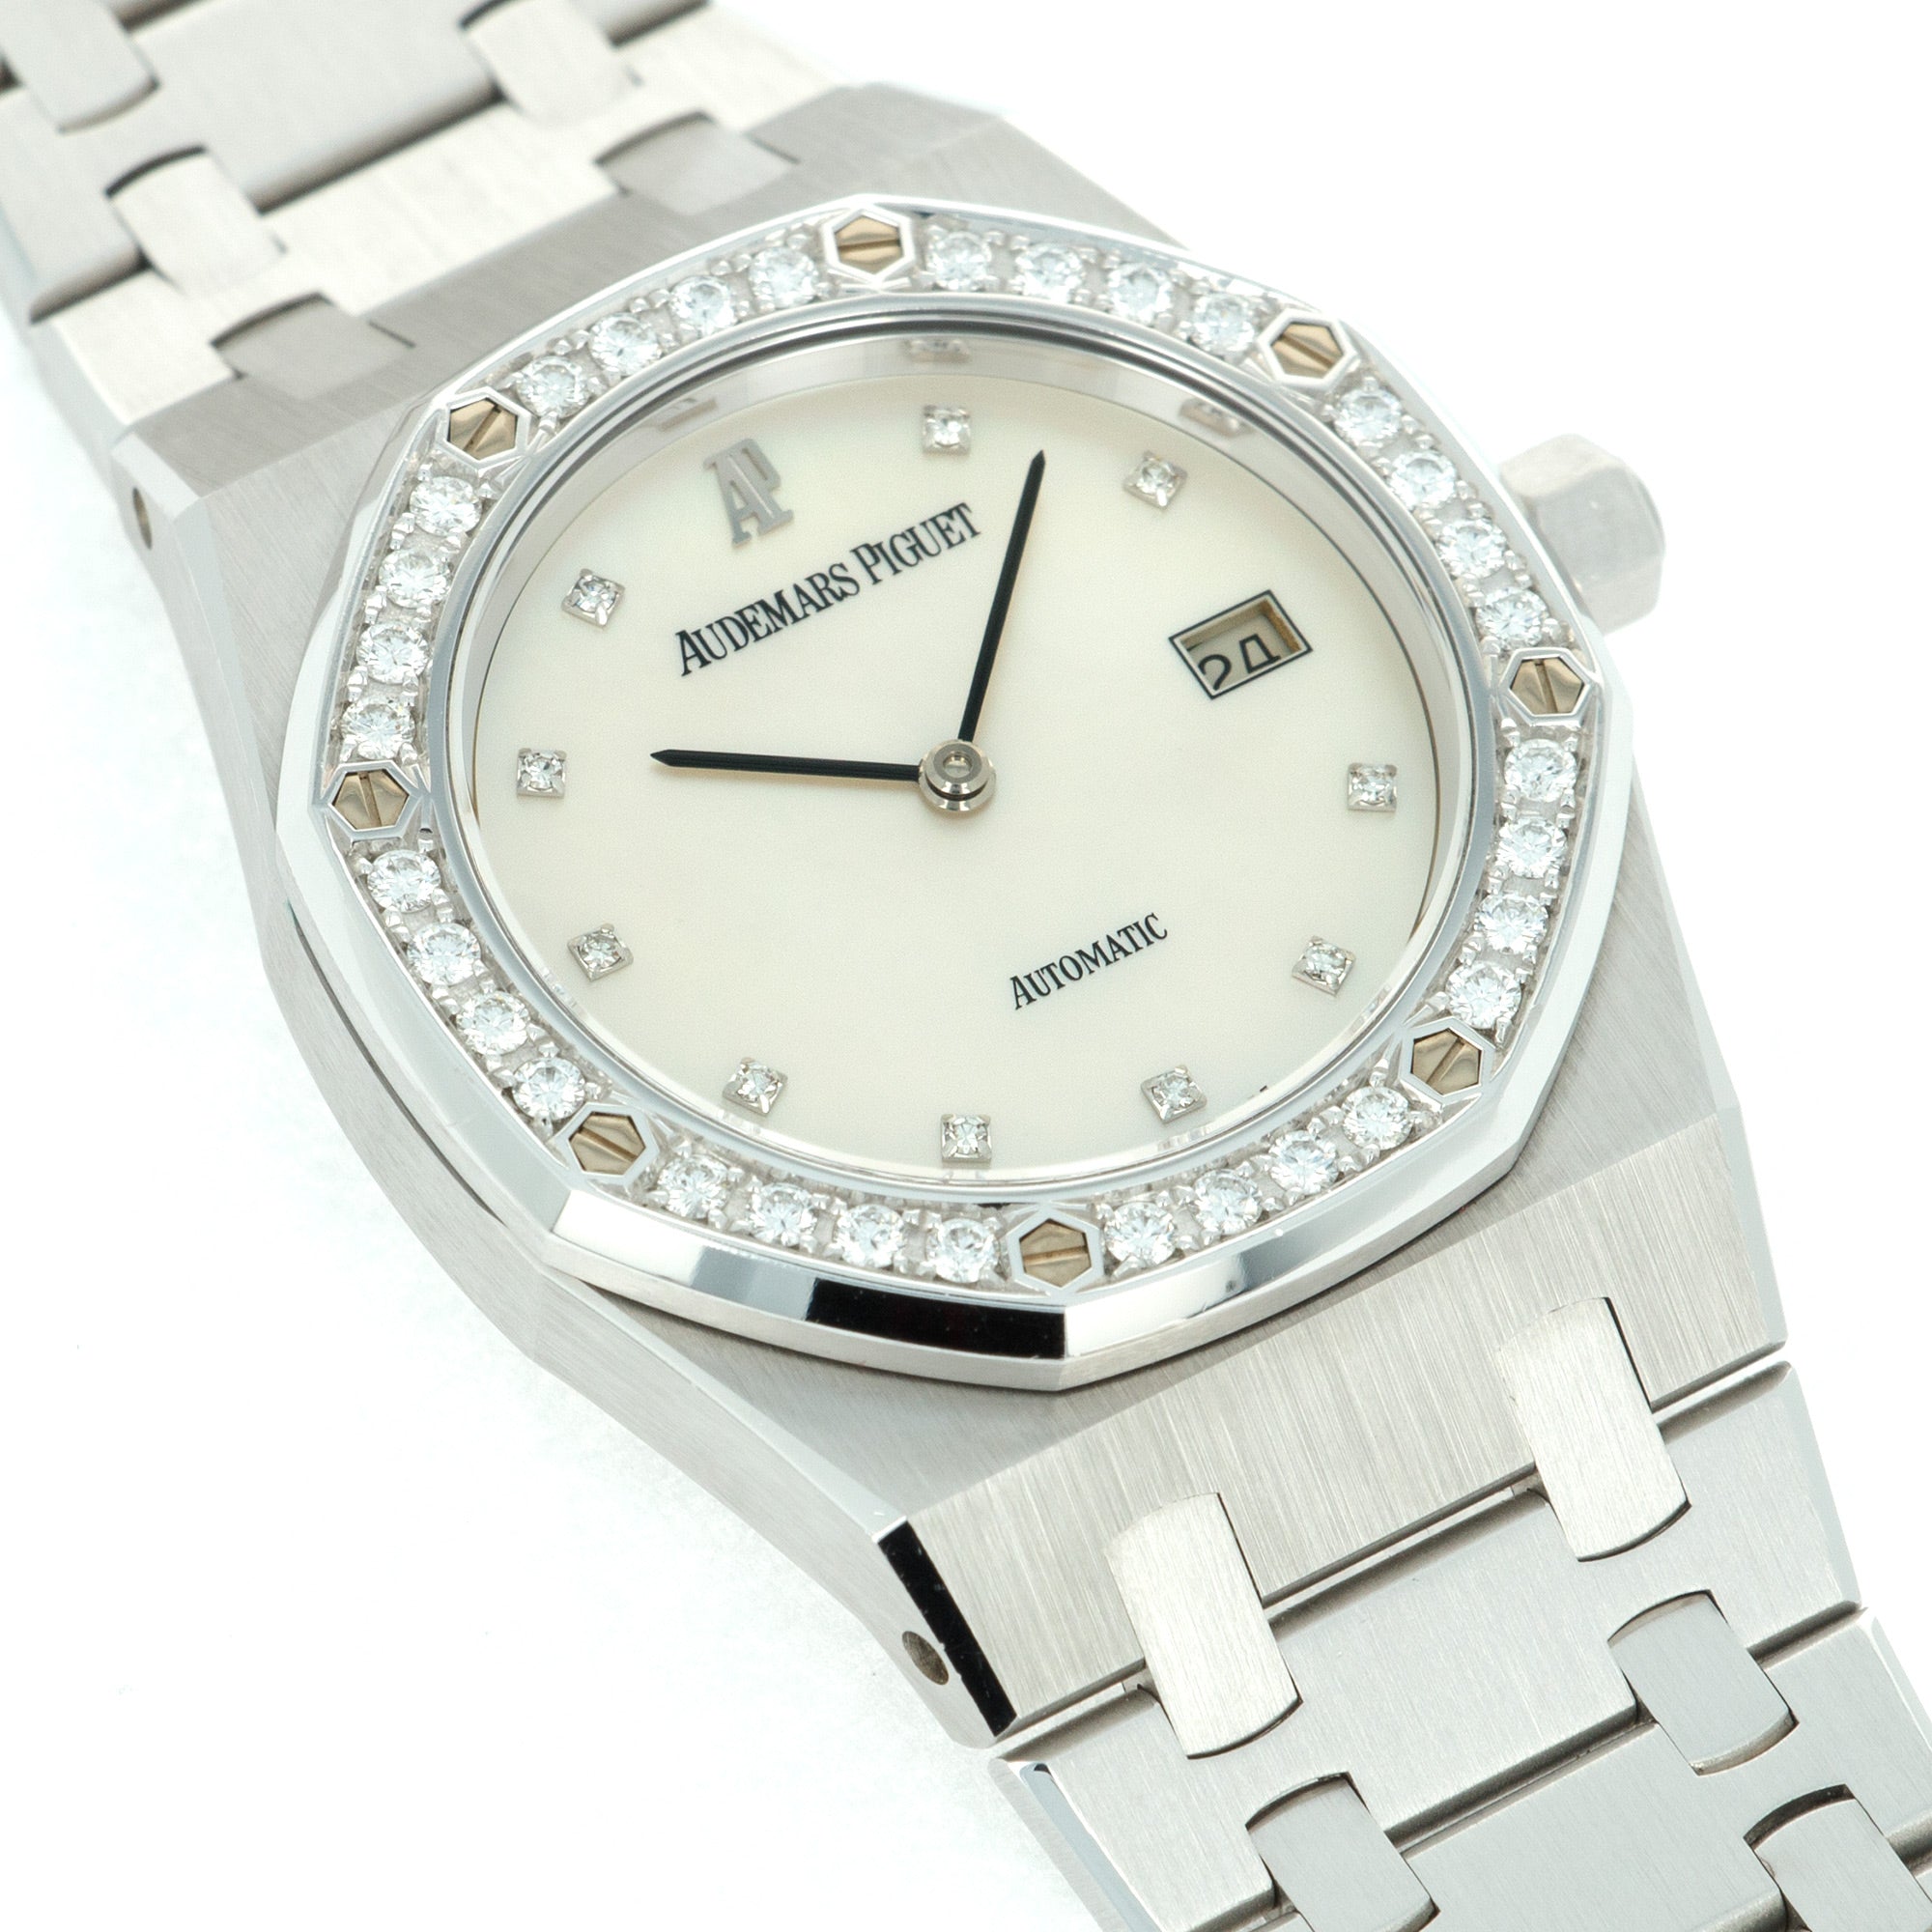 Audemars Piguet - Audemars Piguet White Gold Royal Oak Ref. 15054 with Mother Of Pearl Dial - The Keystone Watches